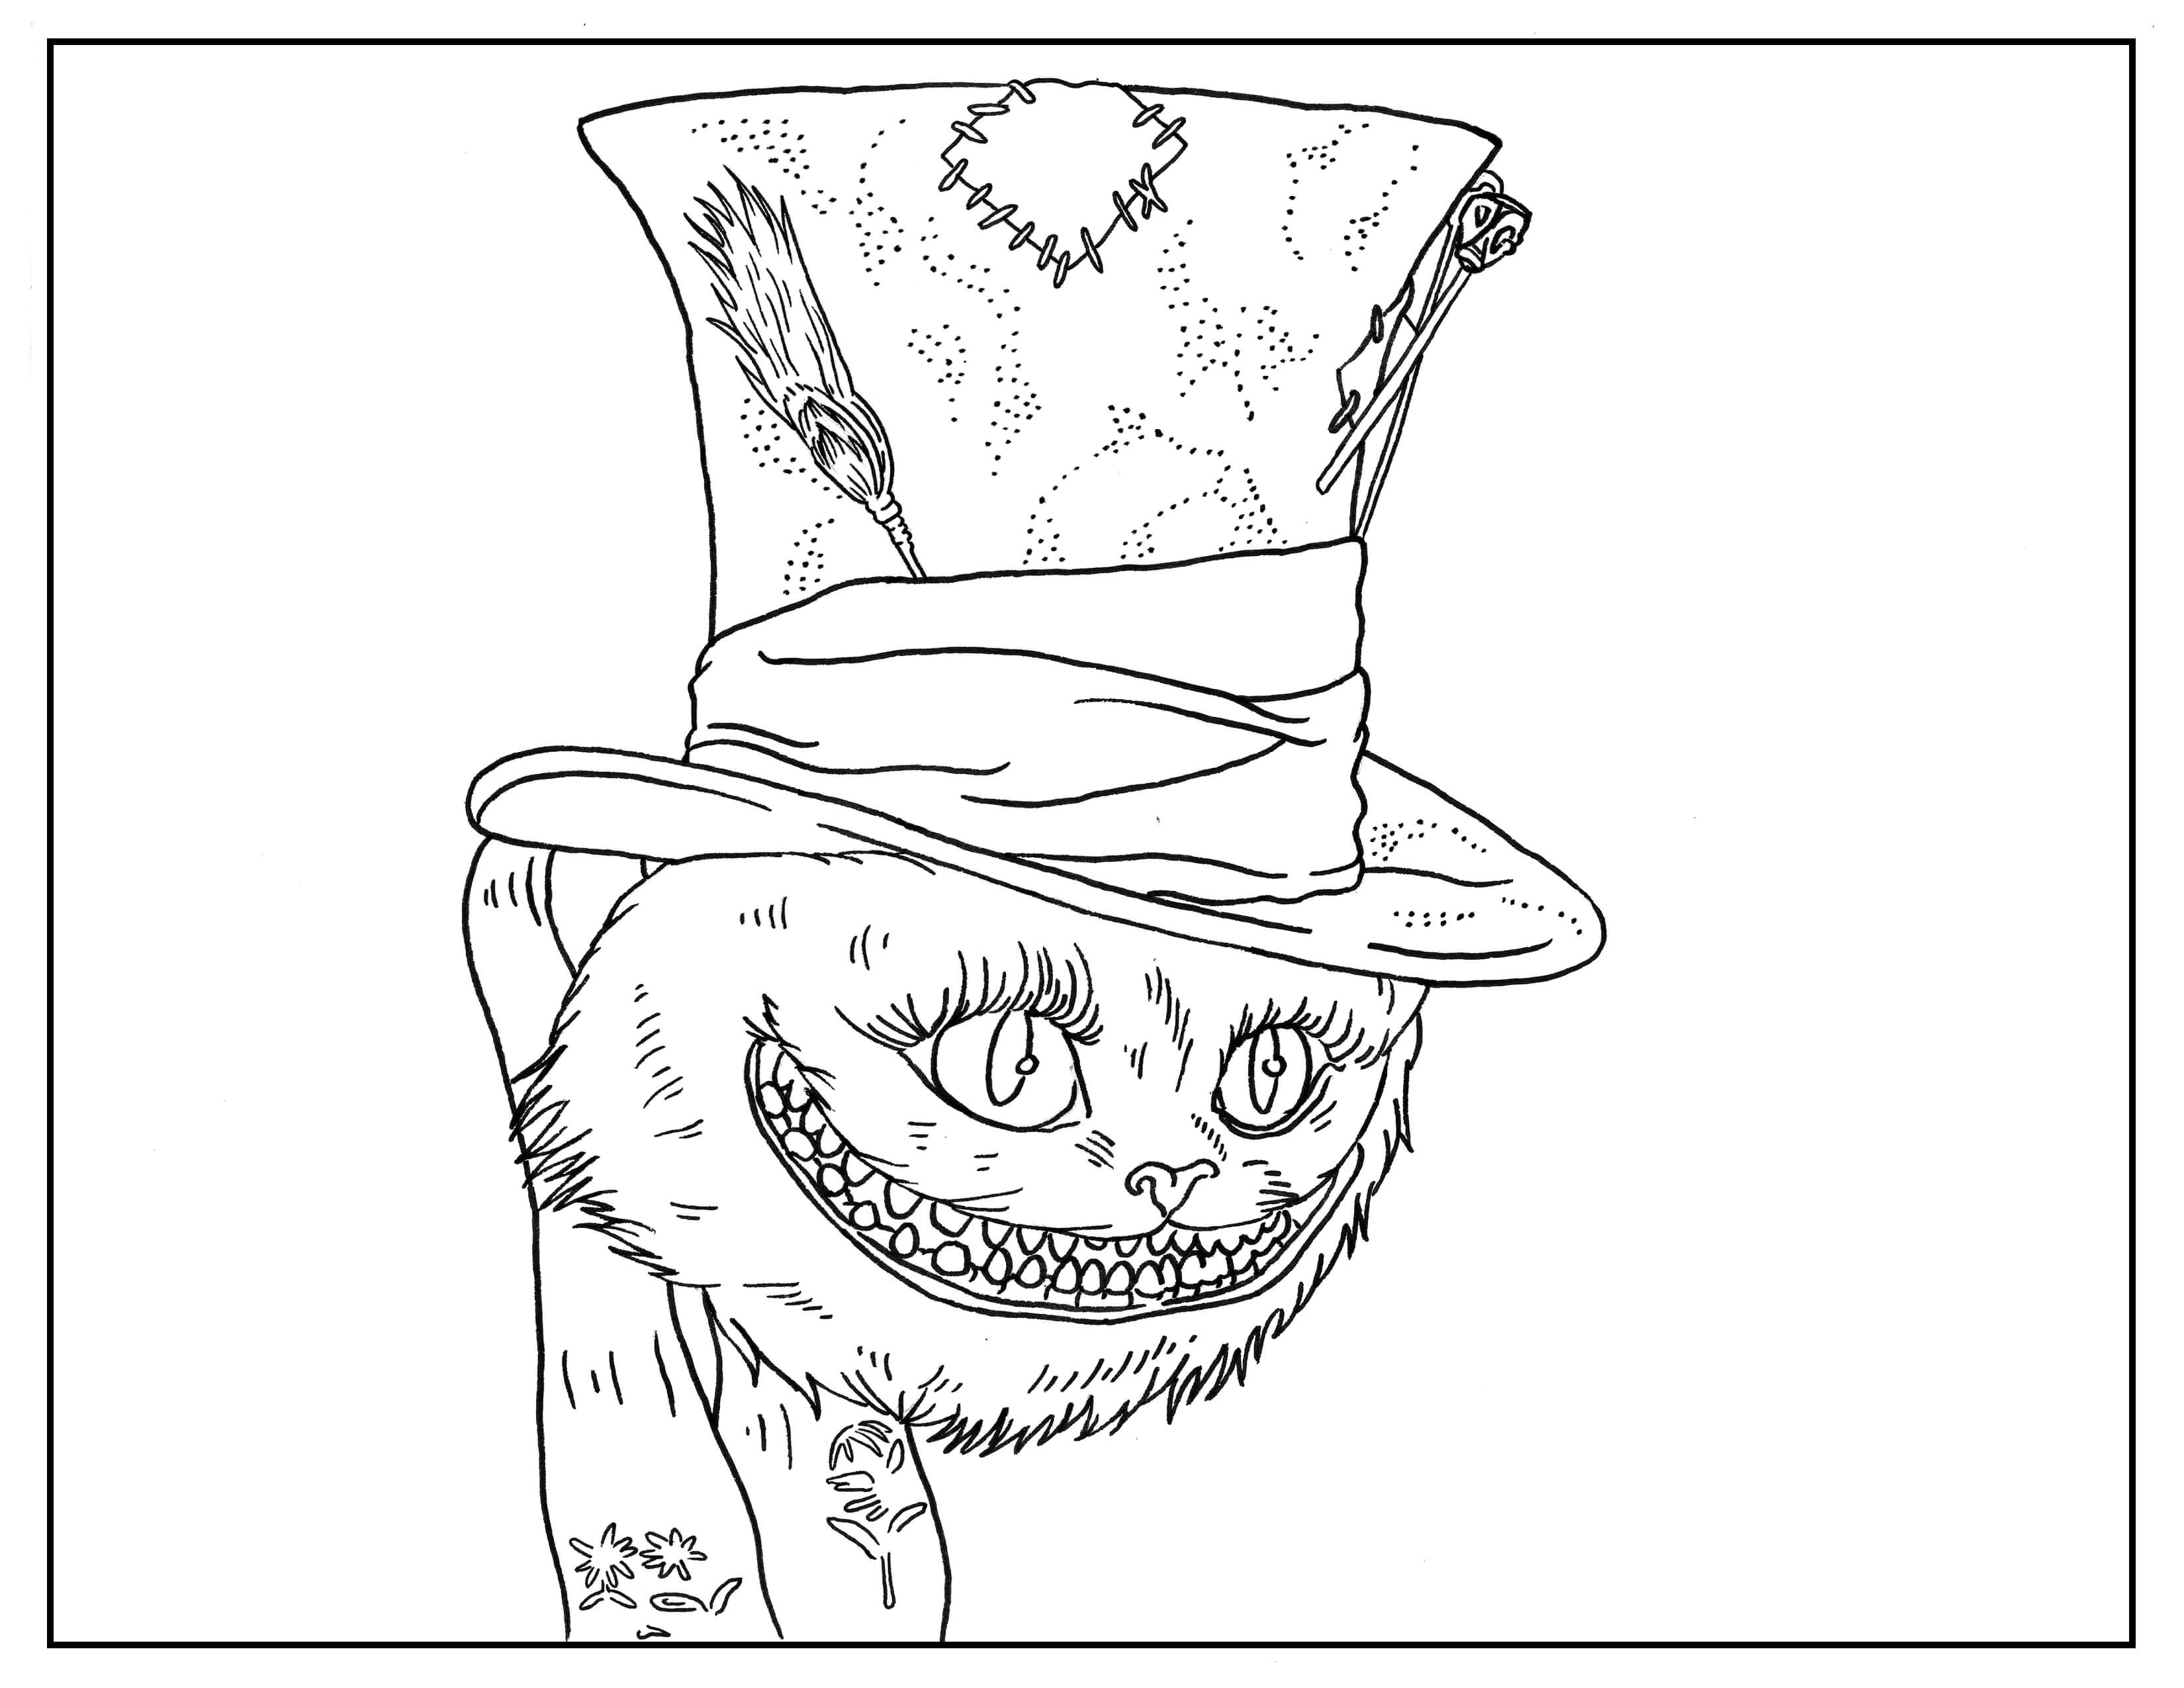 Alice in Wonderland Adult Coloring Book Page